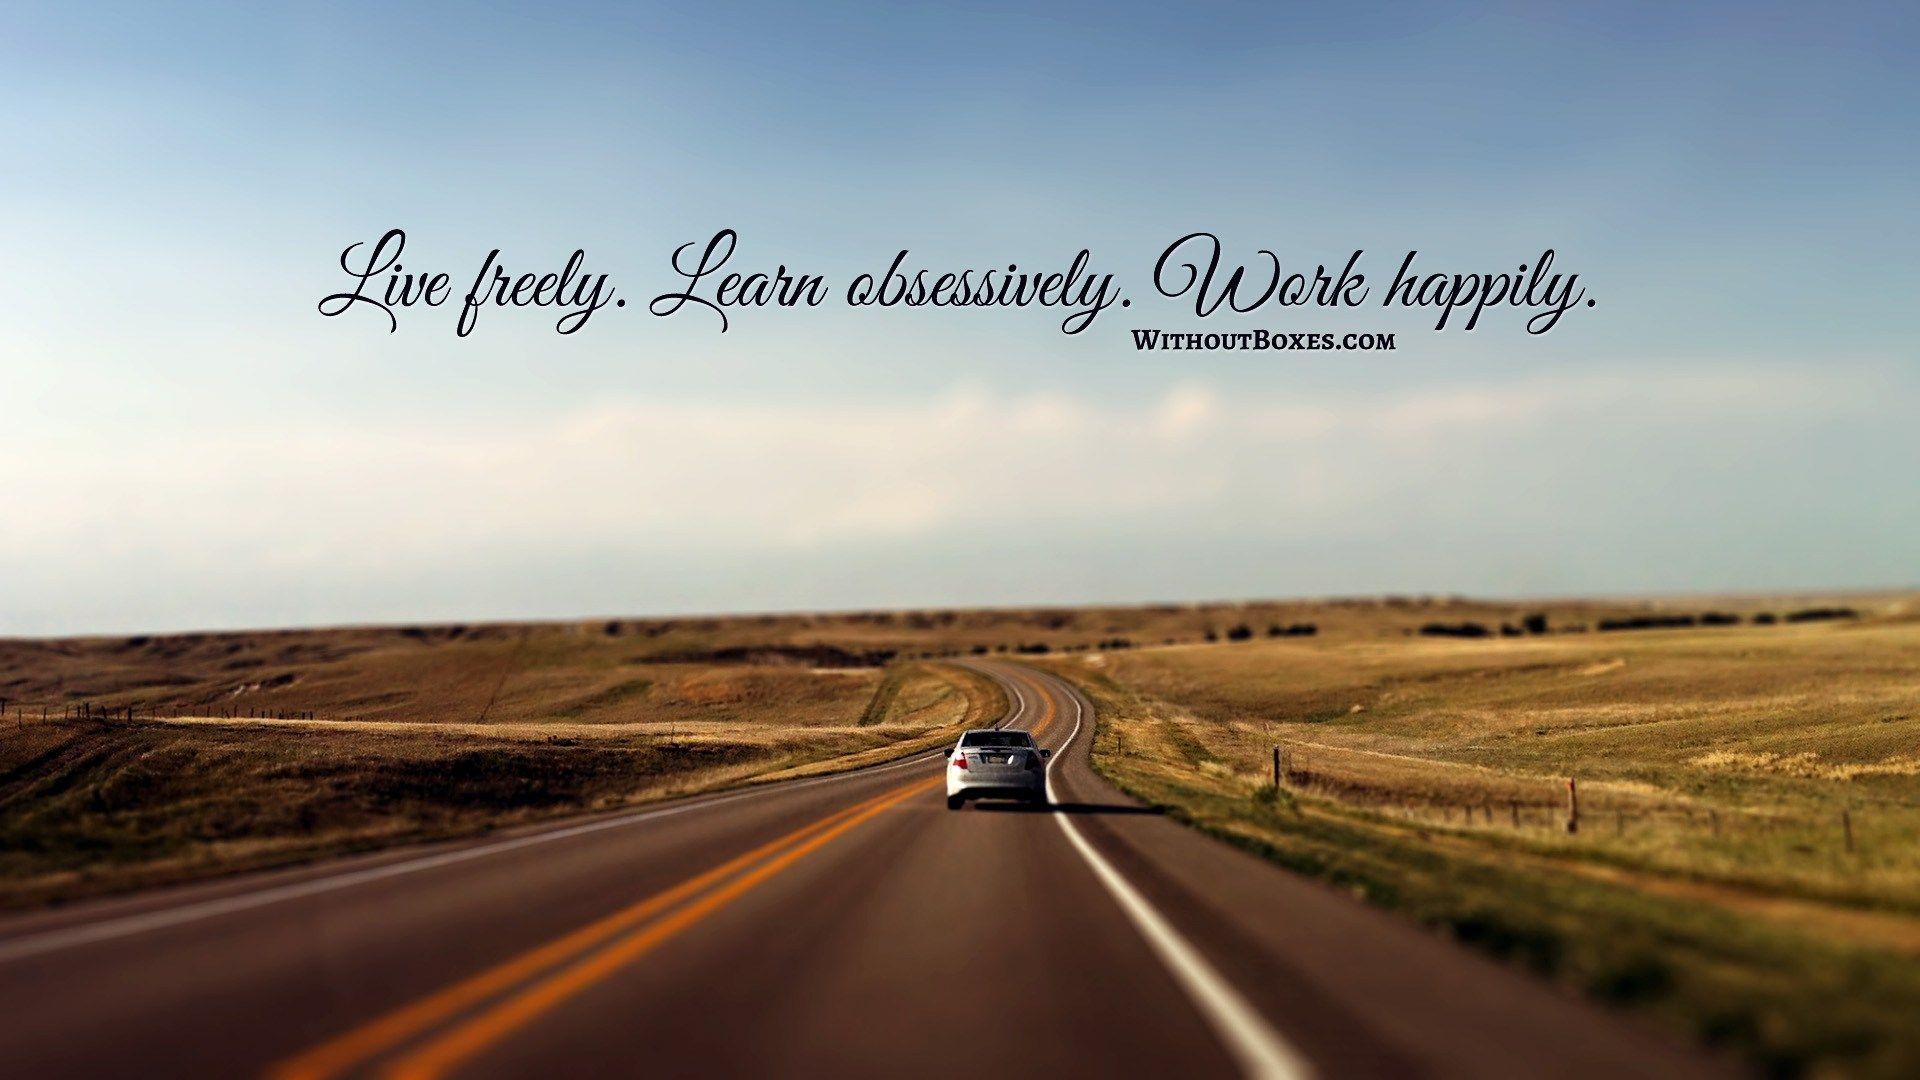 Free Inspirational Wallpaper: The Open Road